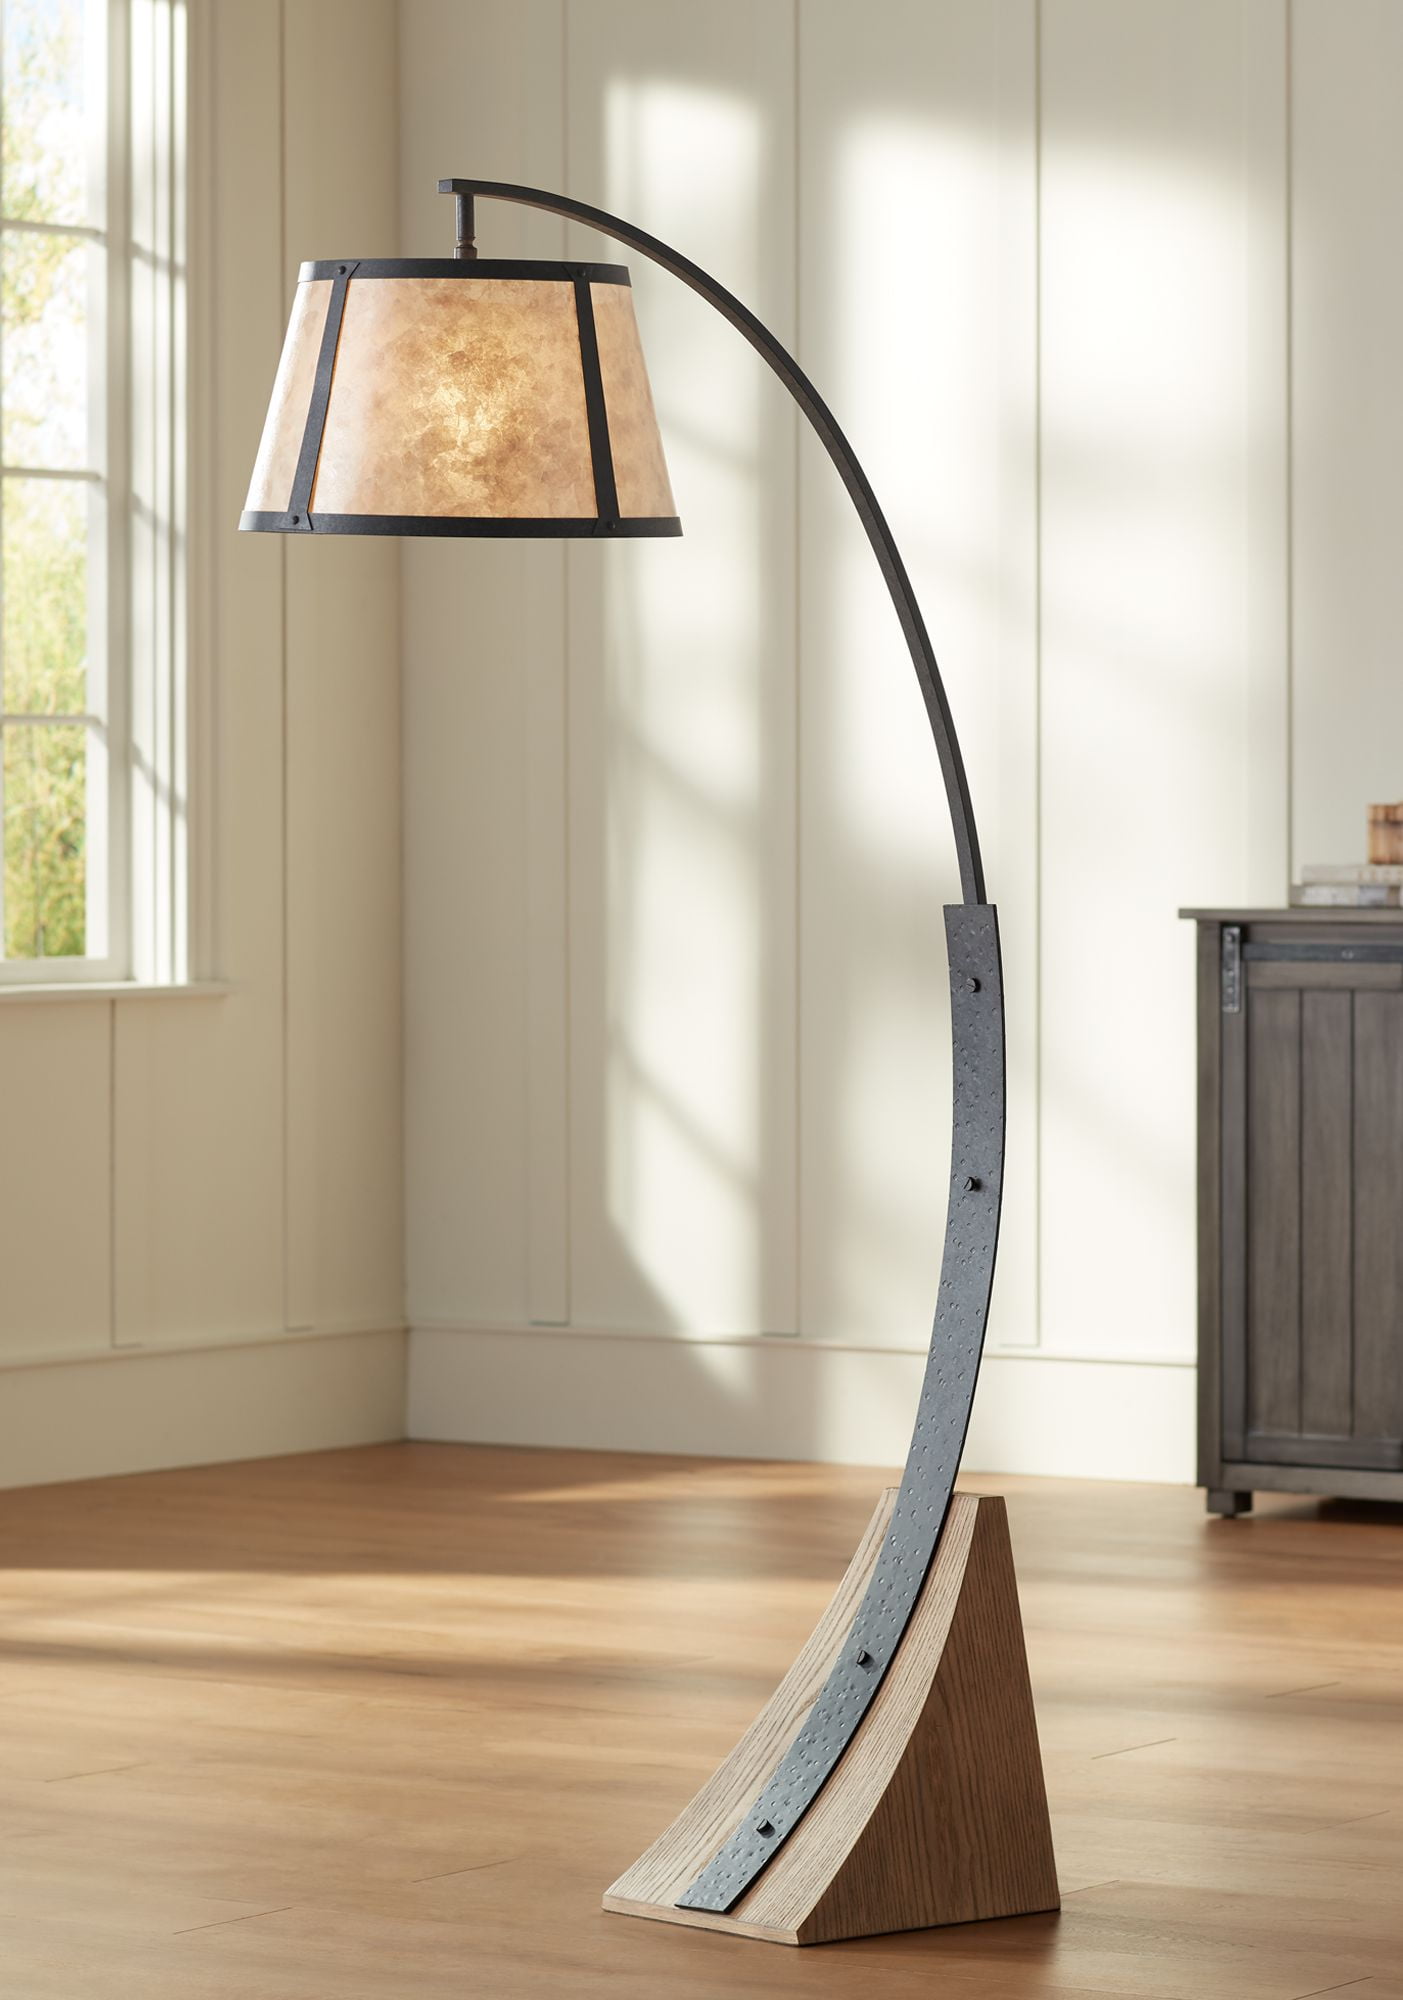 Franklin Iron Works Rustic Mission Arc, Arched Floor Lamp Base